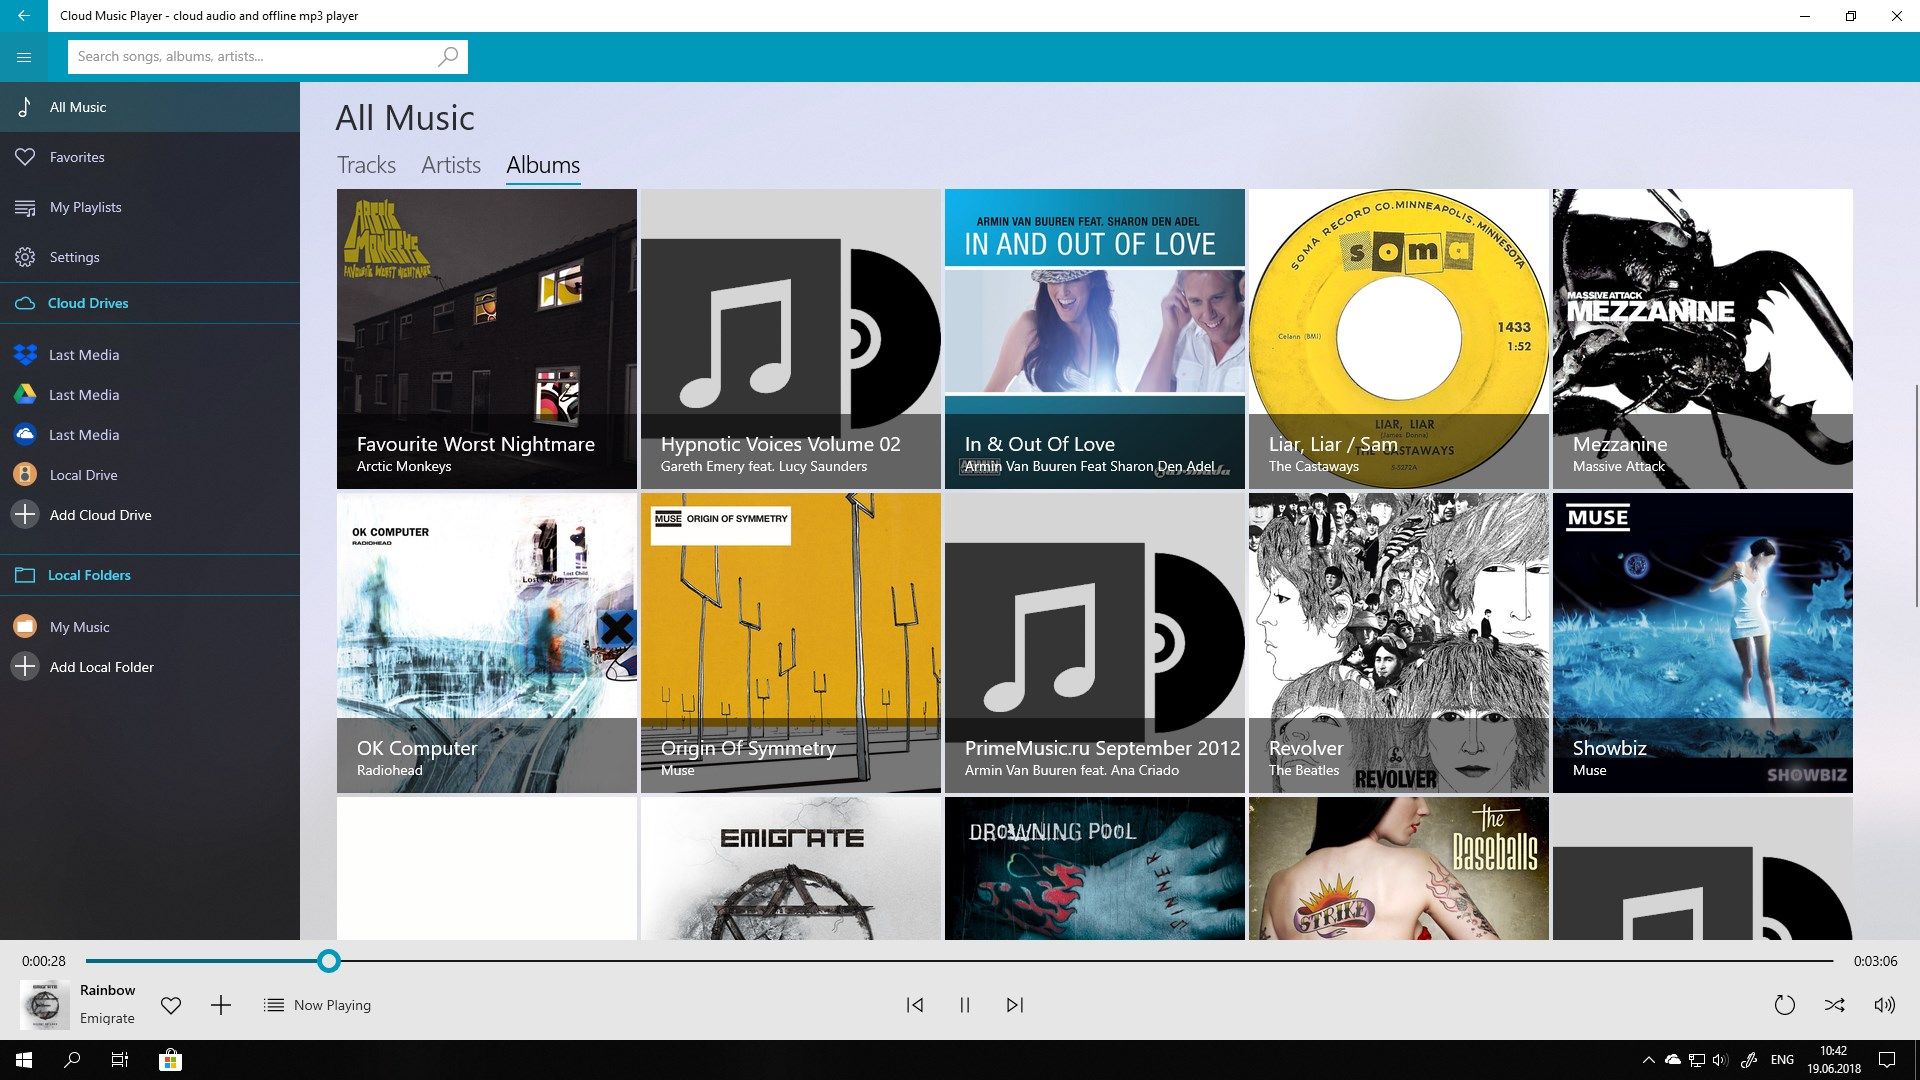 Cloud Music Player - cloud audio and offline mp3 player